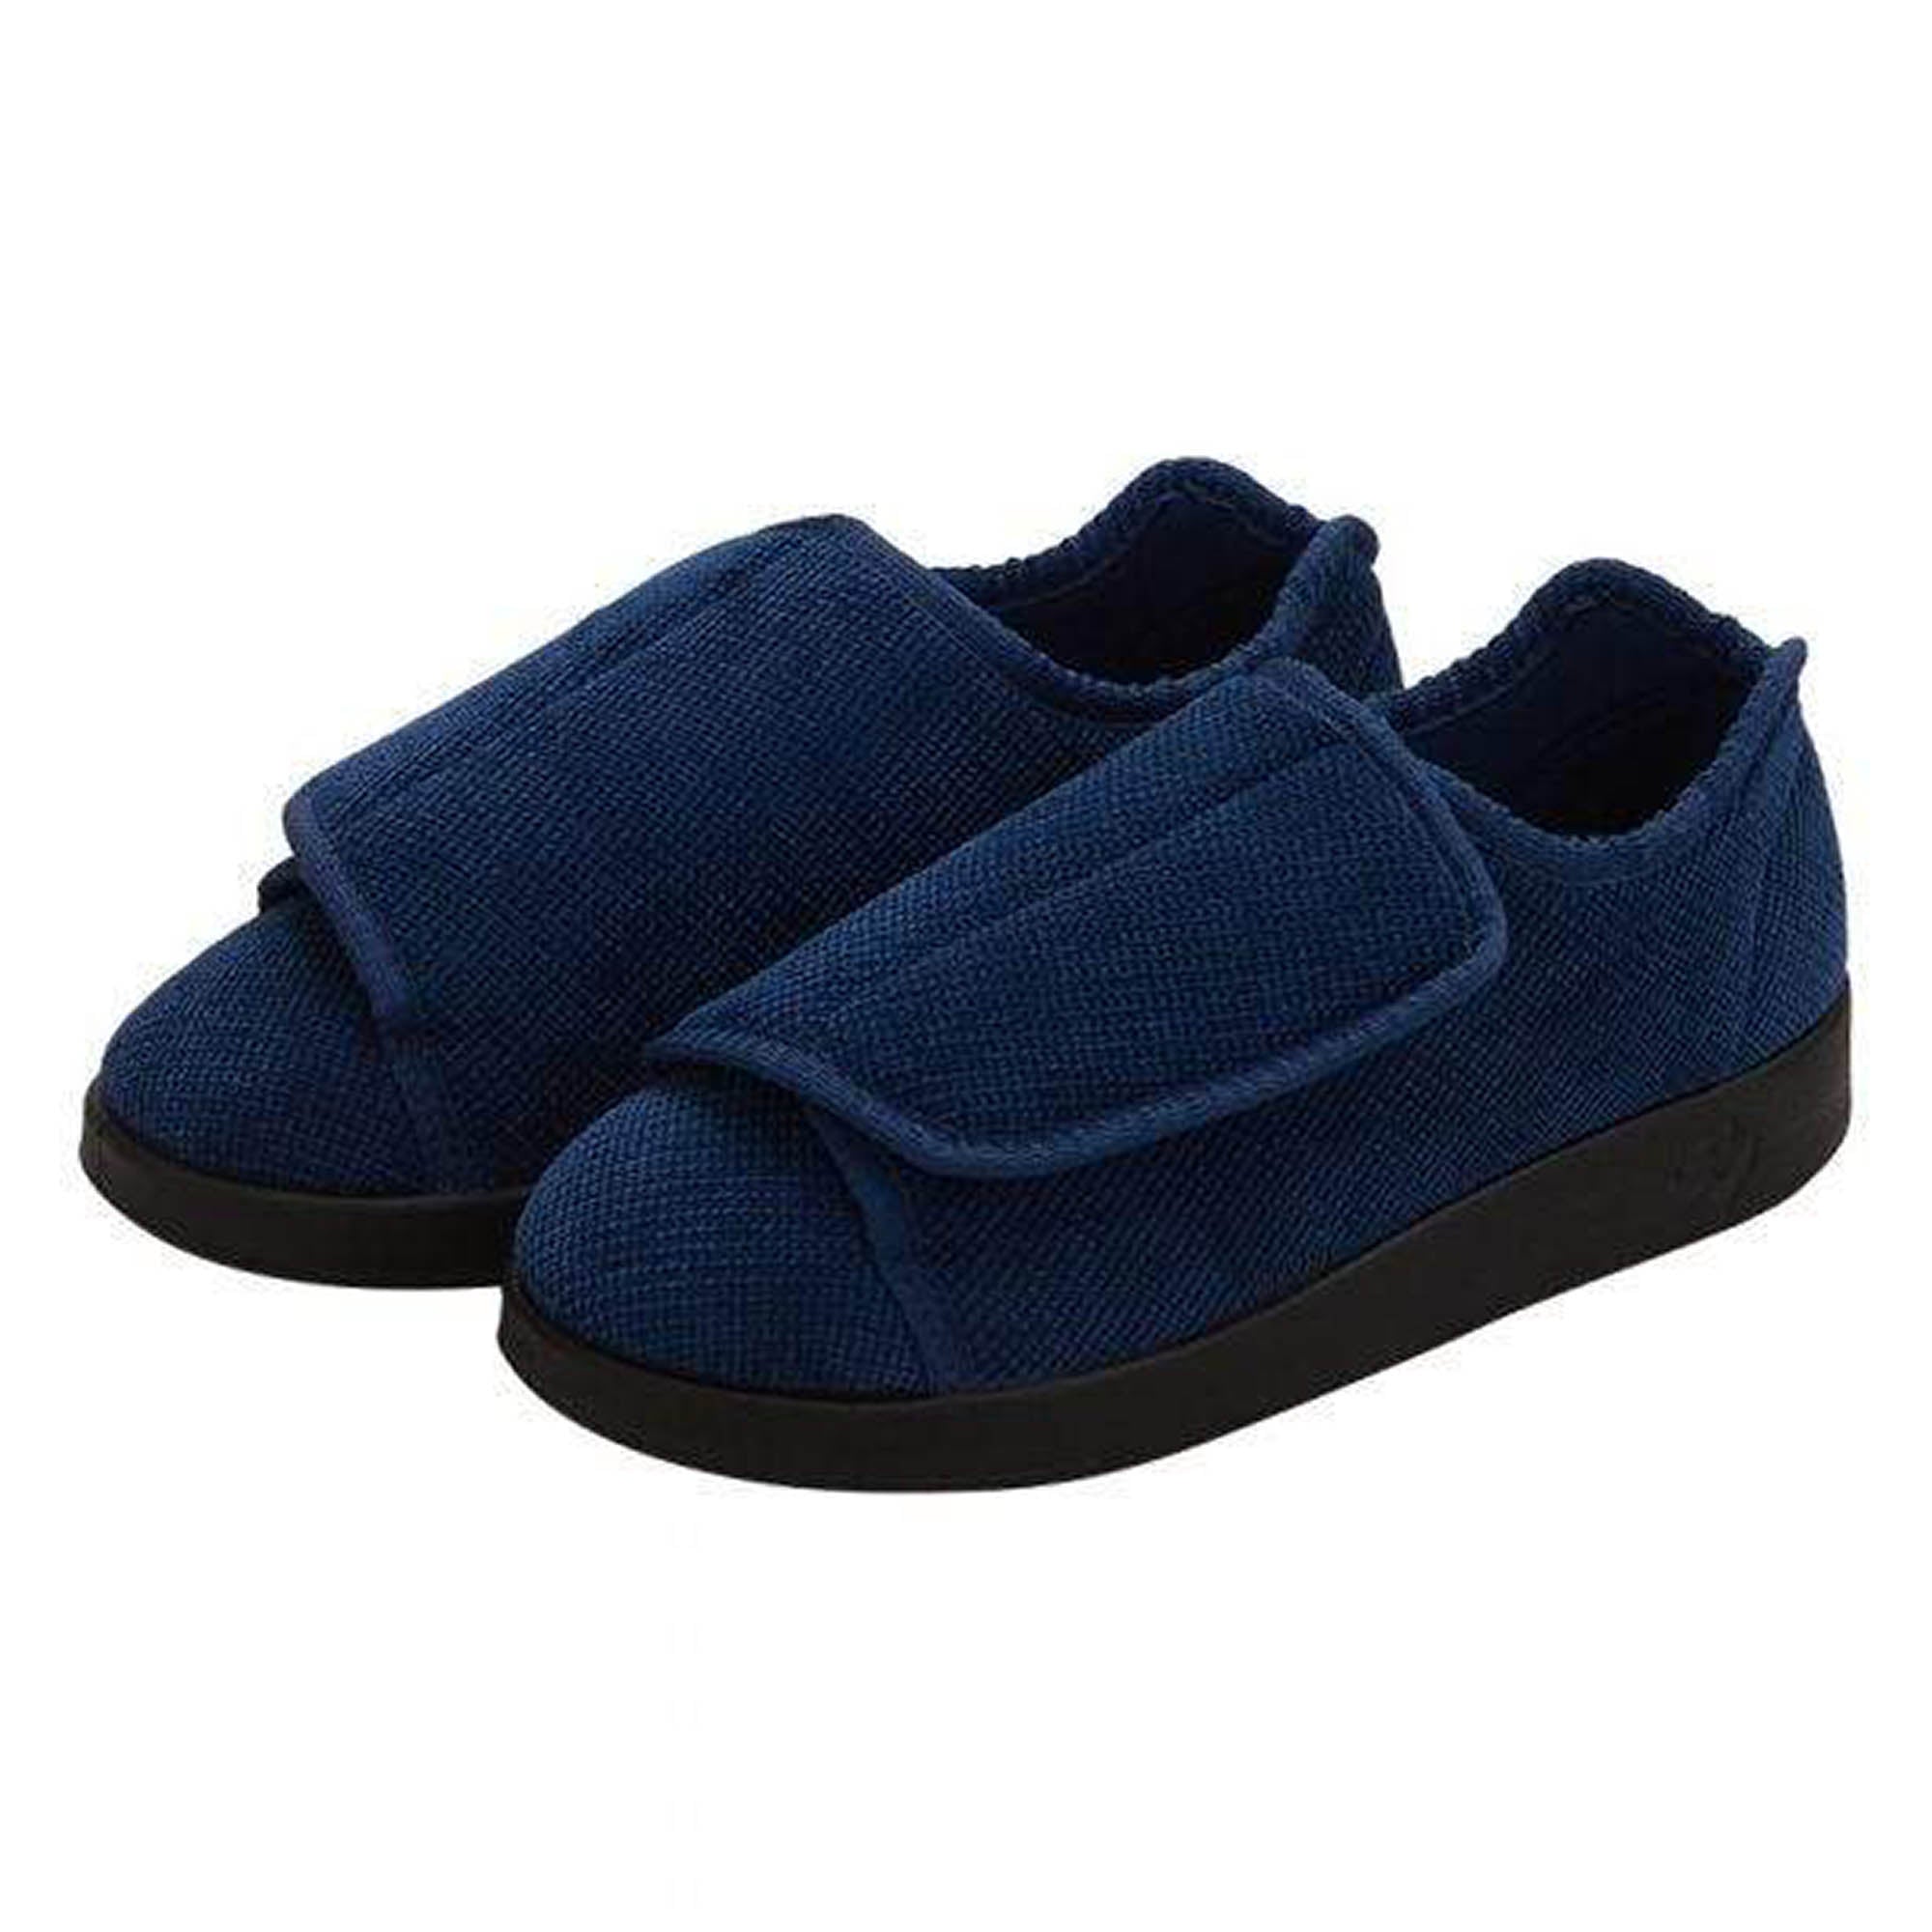 Silverts Women's Antimicrobial Extra Extra Wide Easy-Closure Slippers - Navy - 12